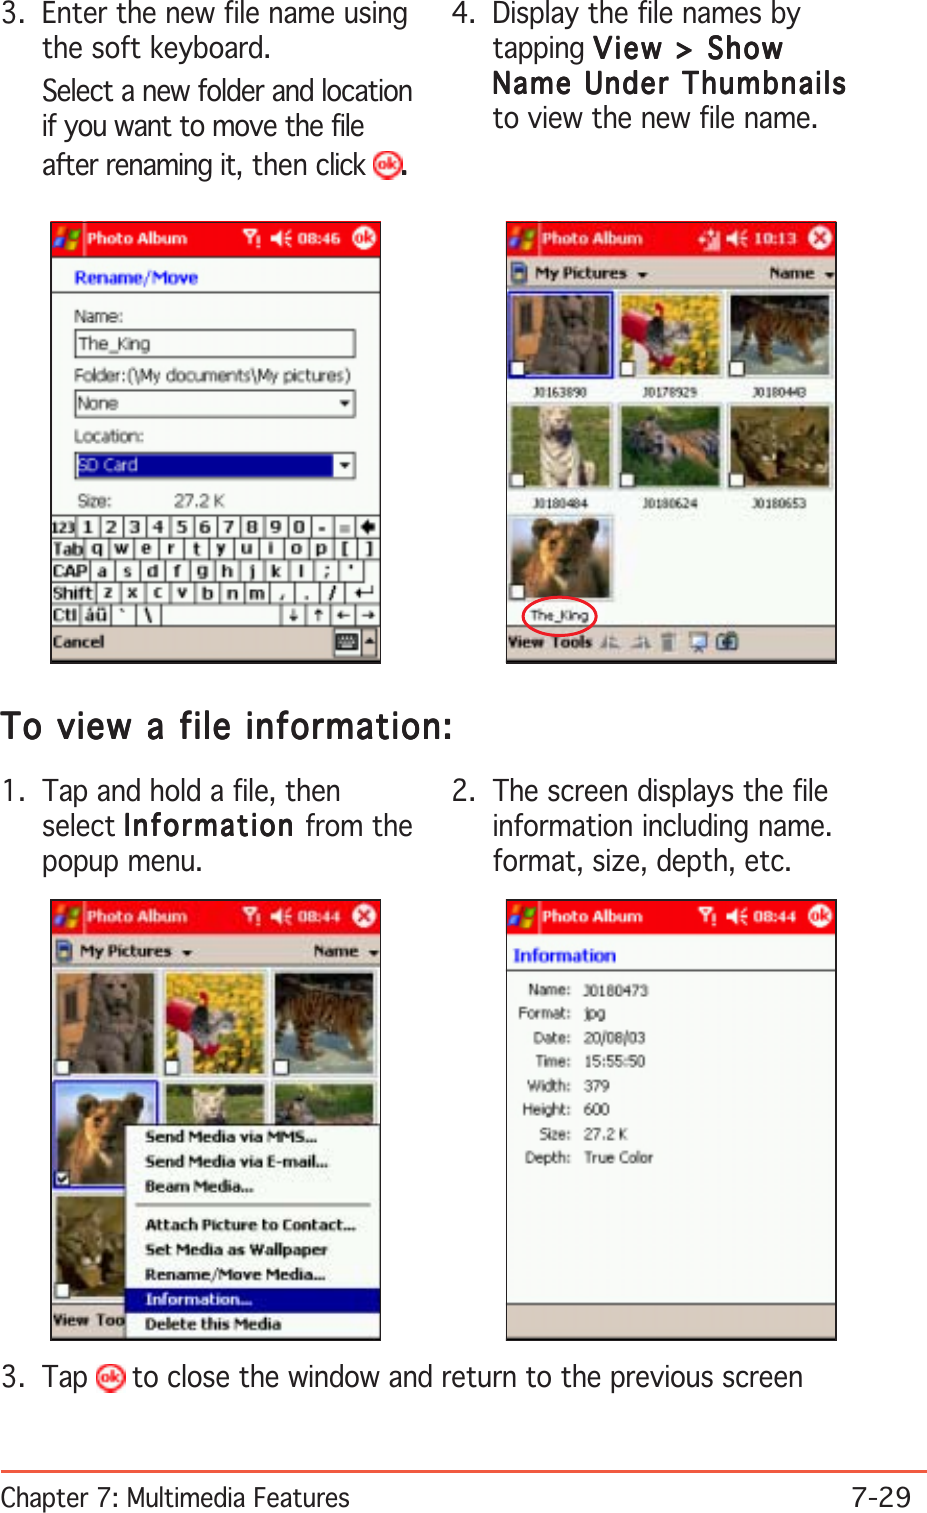 Chapter 7: Multimedia Features7-294. Display the file names bytapping View &gt; ShowView &gt; ShowView &gt; ShowView &gt; ShowView &gt; ShowName Under ThumbnailsName Under ThumbnailsName Under ThumbnailsName Under ThumbnailsName Under Thumbnailsto view the new file name.3. Enter the new file name usingthe soft keyboard.Select a new folder and locationif you want to move the fileafter renaming it, then click .....2. The screen displays the fileinformation including name.format, size, depth, etc.1. Tap and hold a file, thenselect InformationInformationInformationInformationInformation from thepopup menu.To view a file information:To view a file information:To view a file information:To view a file information:To view a file information:3. Tap   to close the window and return to the previous screen